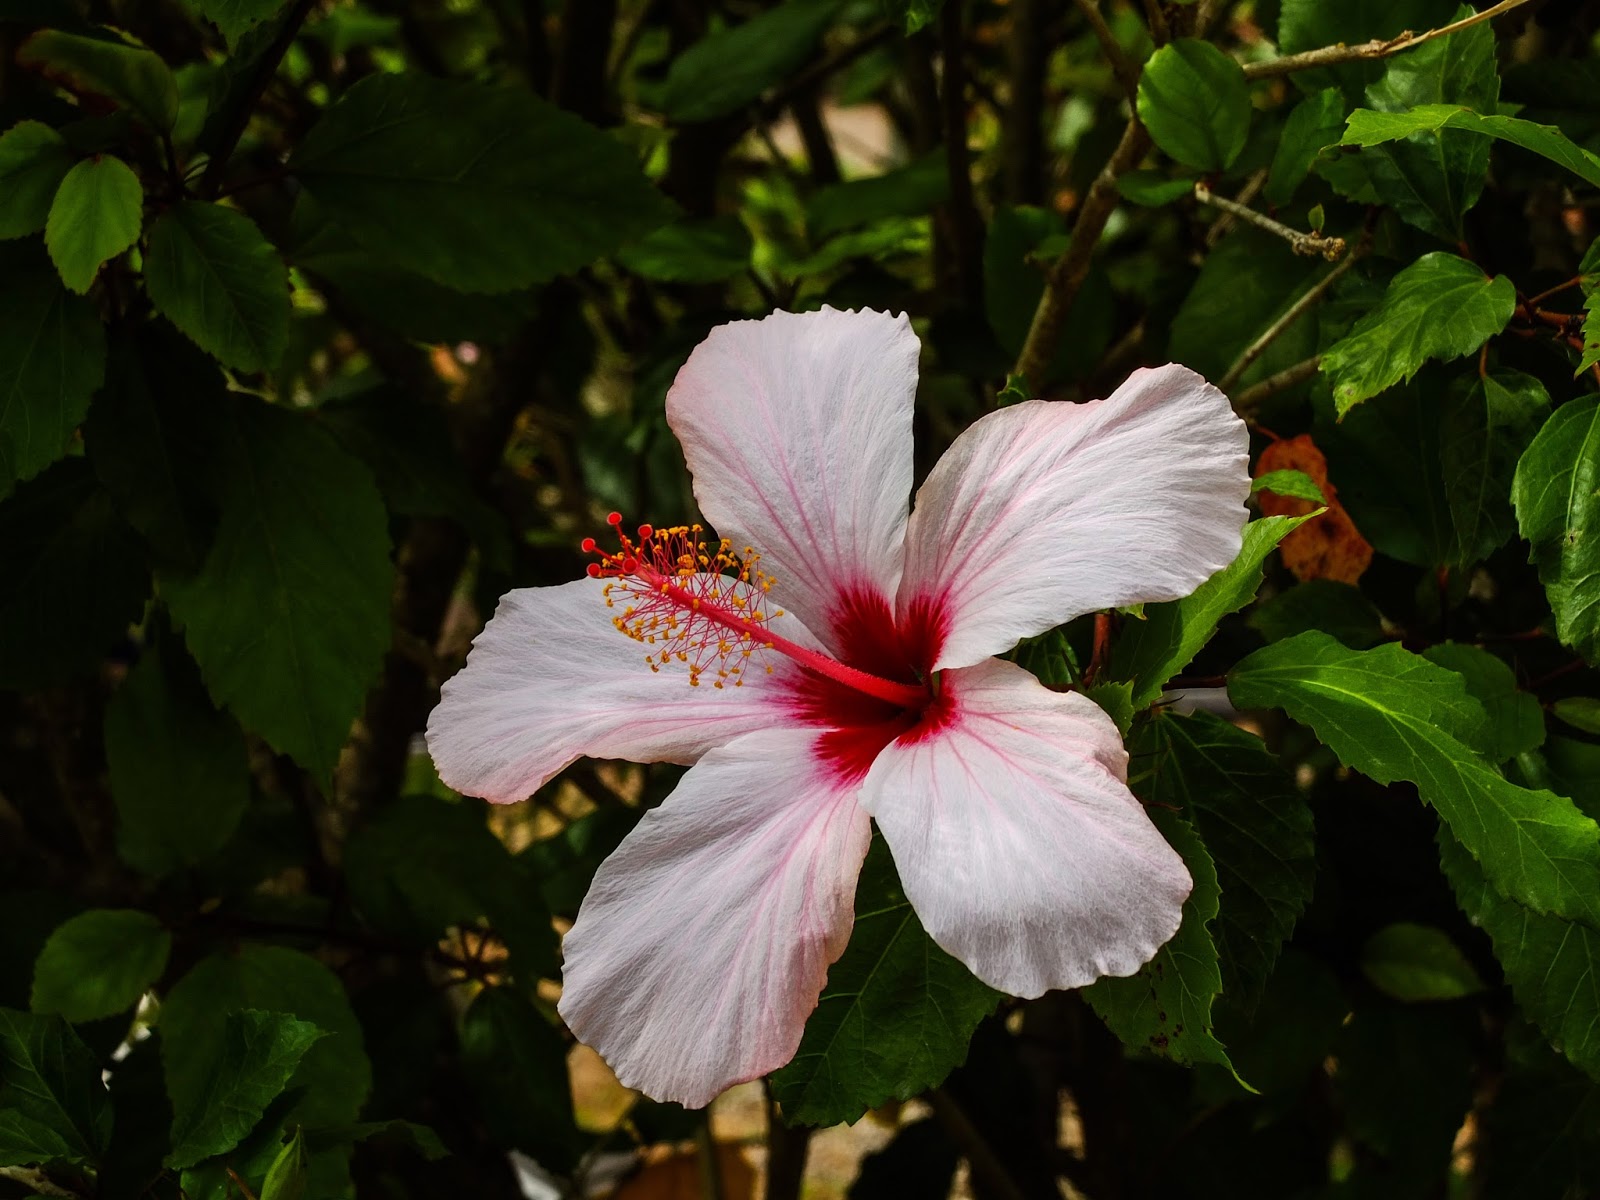 A light pink hibiscus pictured on a bush in a garden in Porto, Portugal.